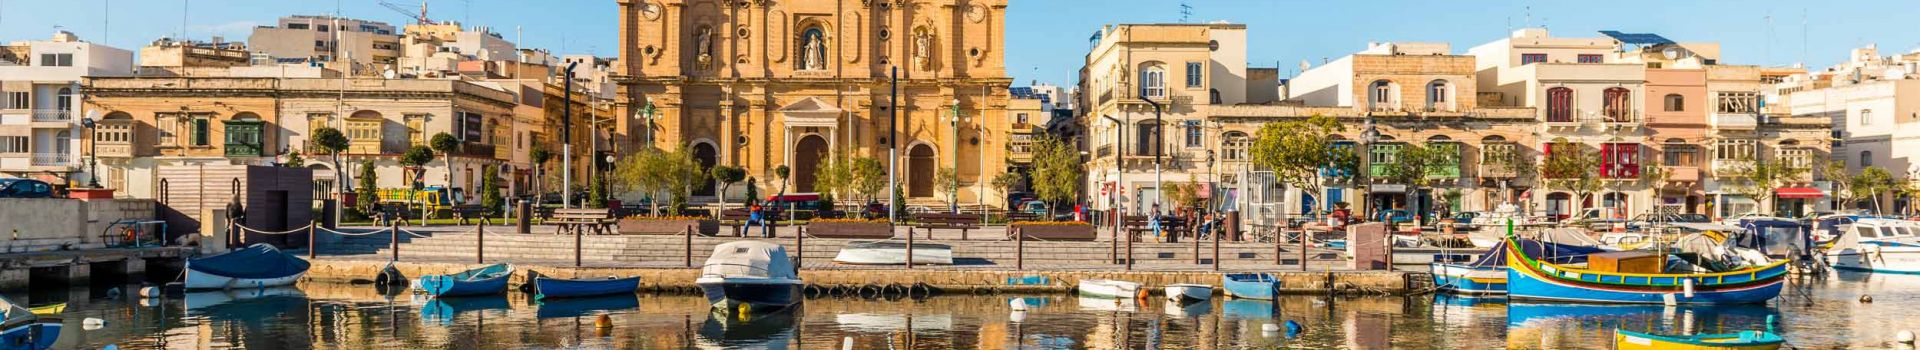 All Inclusive Holidays to Malta with Cassidy Travel